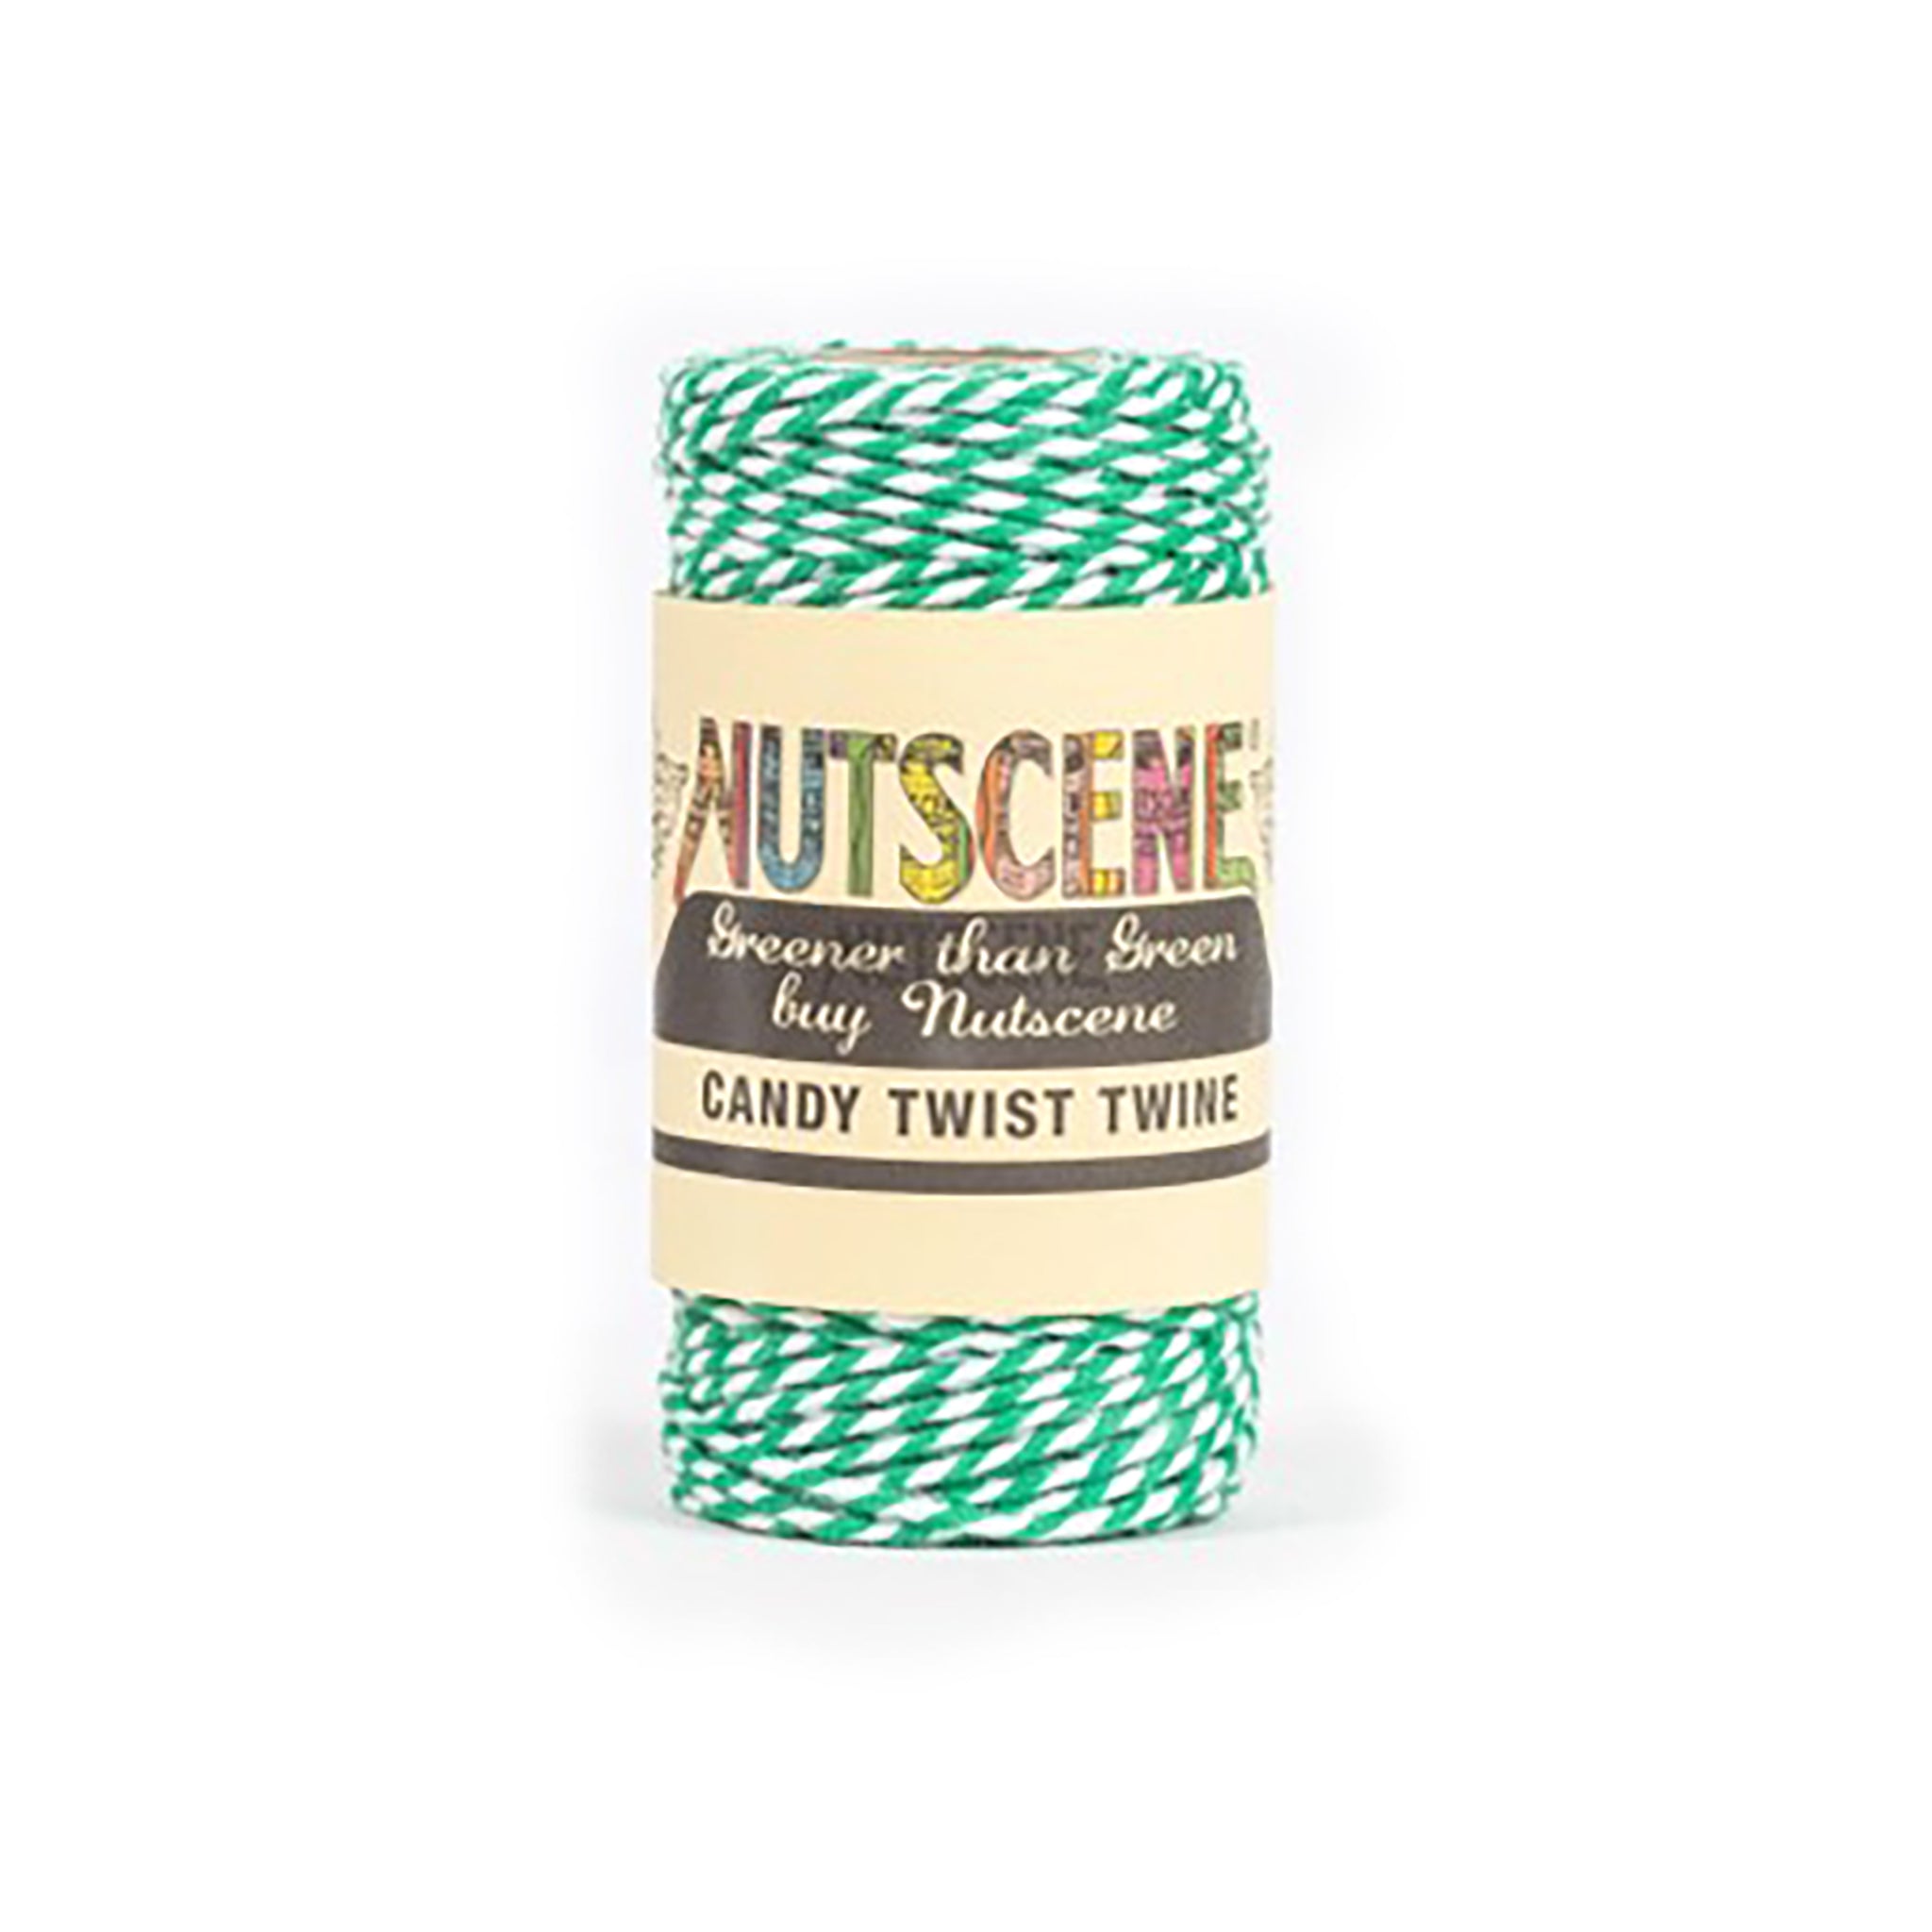 Green and white candy stripe crafting or bakers twine - Nutscene. On a white background